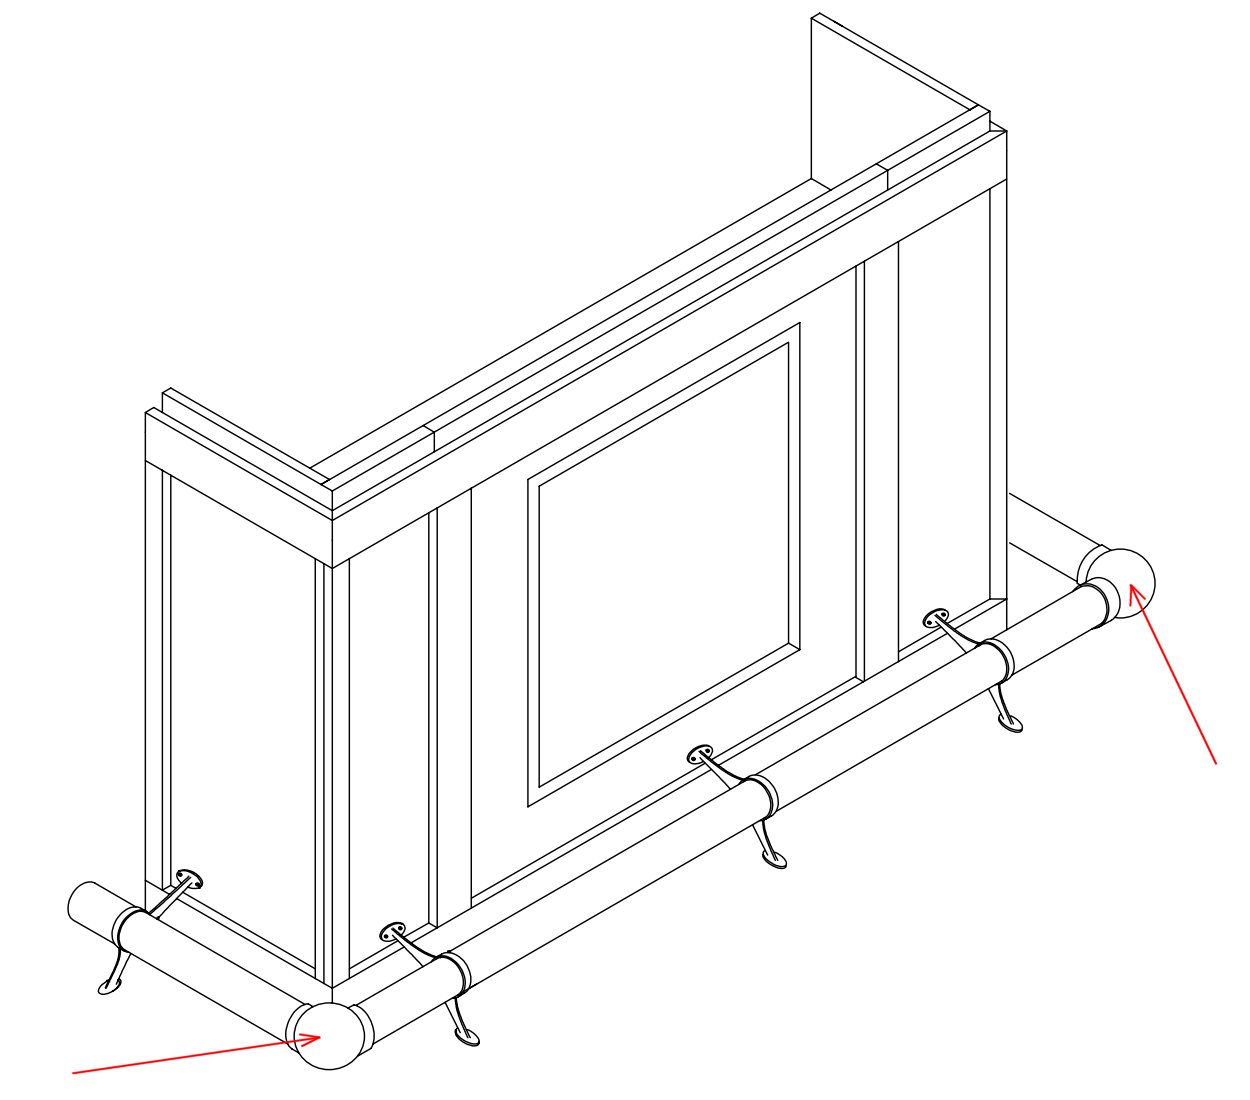 Assembly Drawing - Assemble the Rails